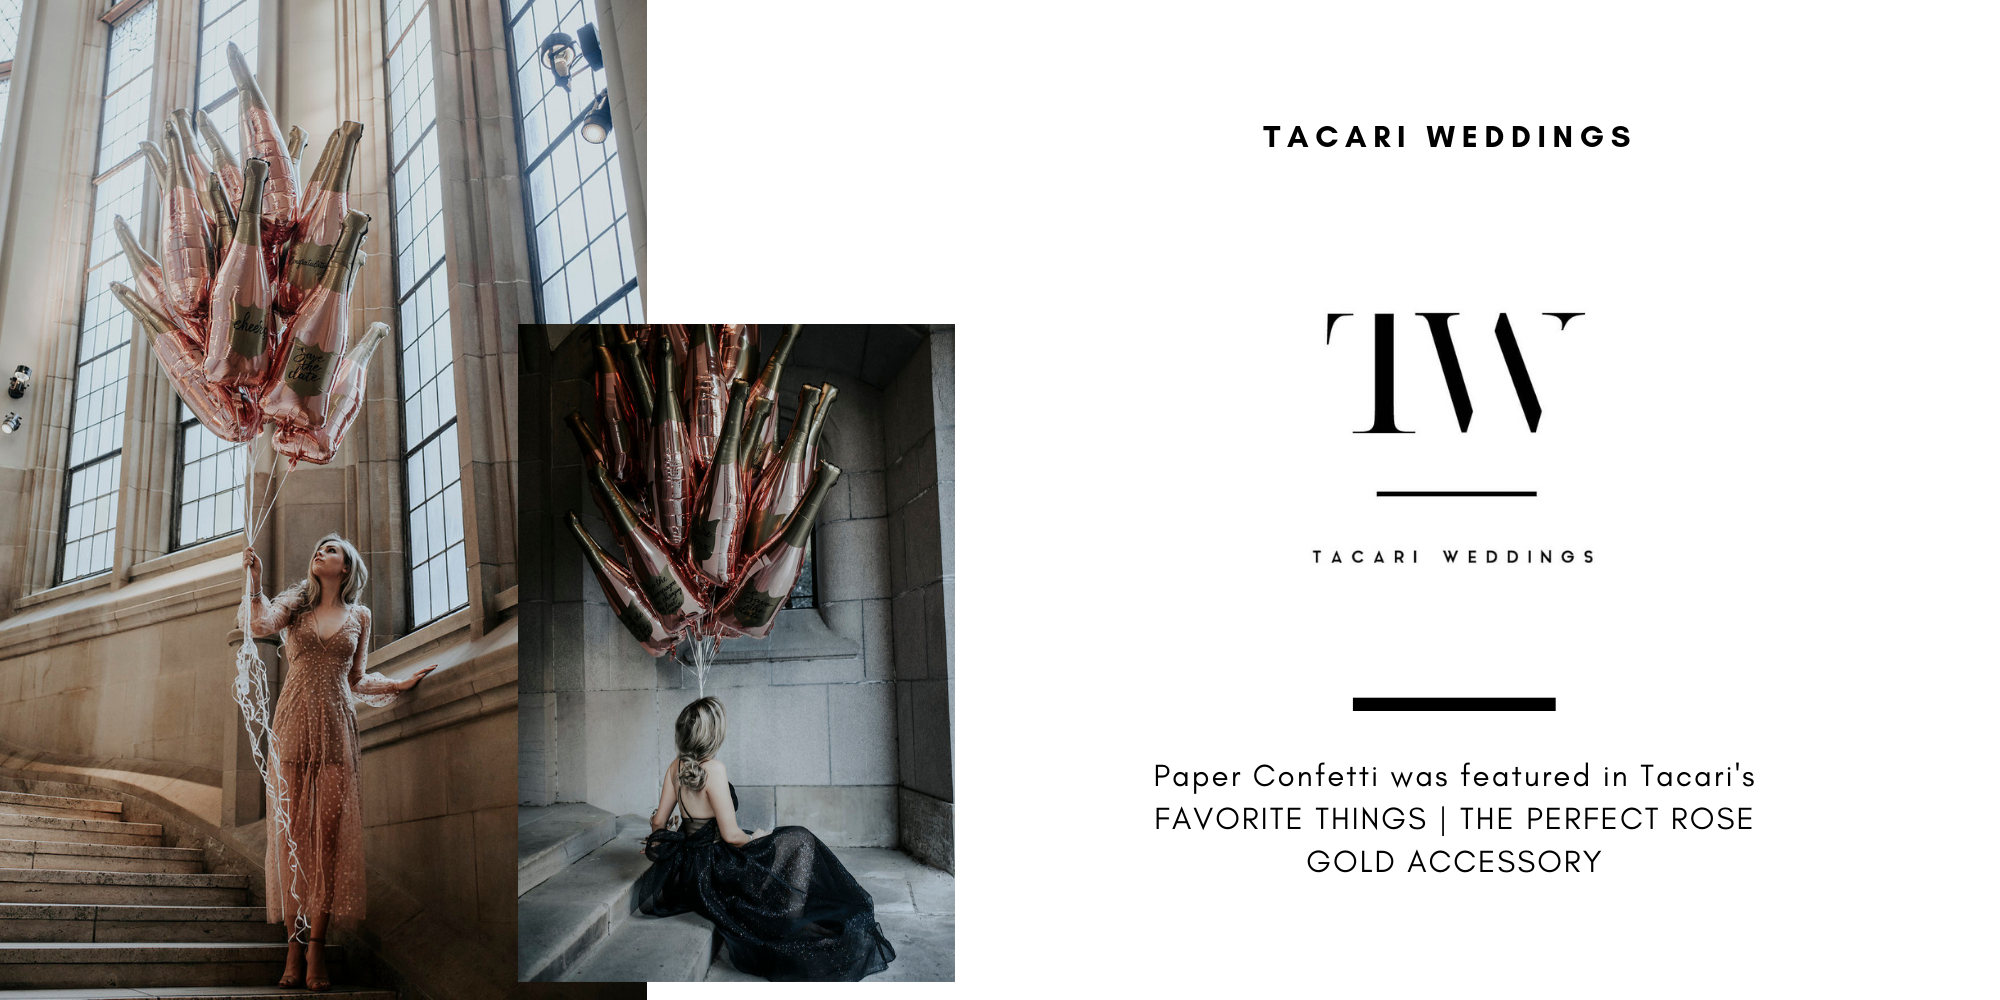 Paper Confetti was featured in Tacari Weddings "Favorite Things The Perfect Rose Gold Accessory" for our exclusive customizable rose gold champagne bottle balloons. 